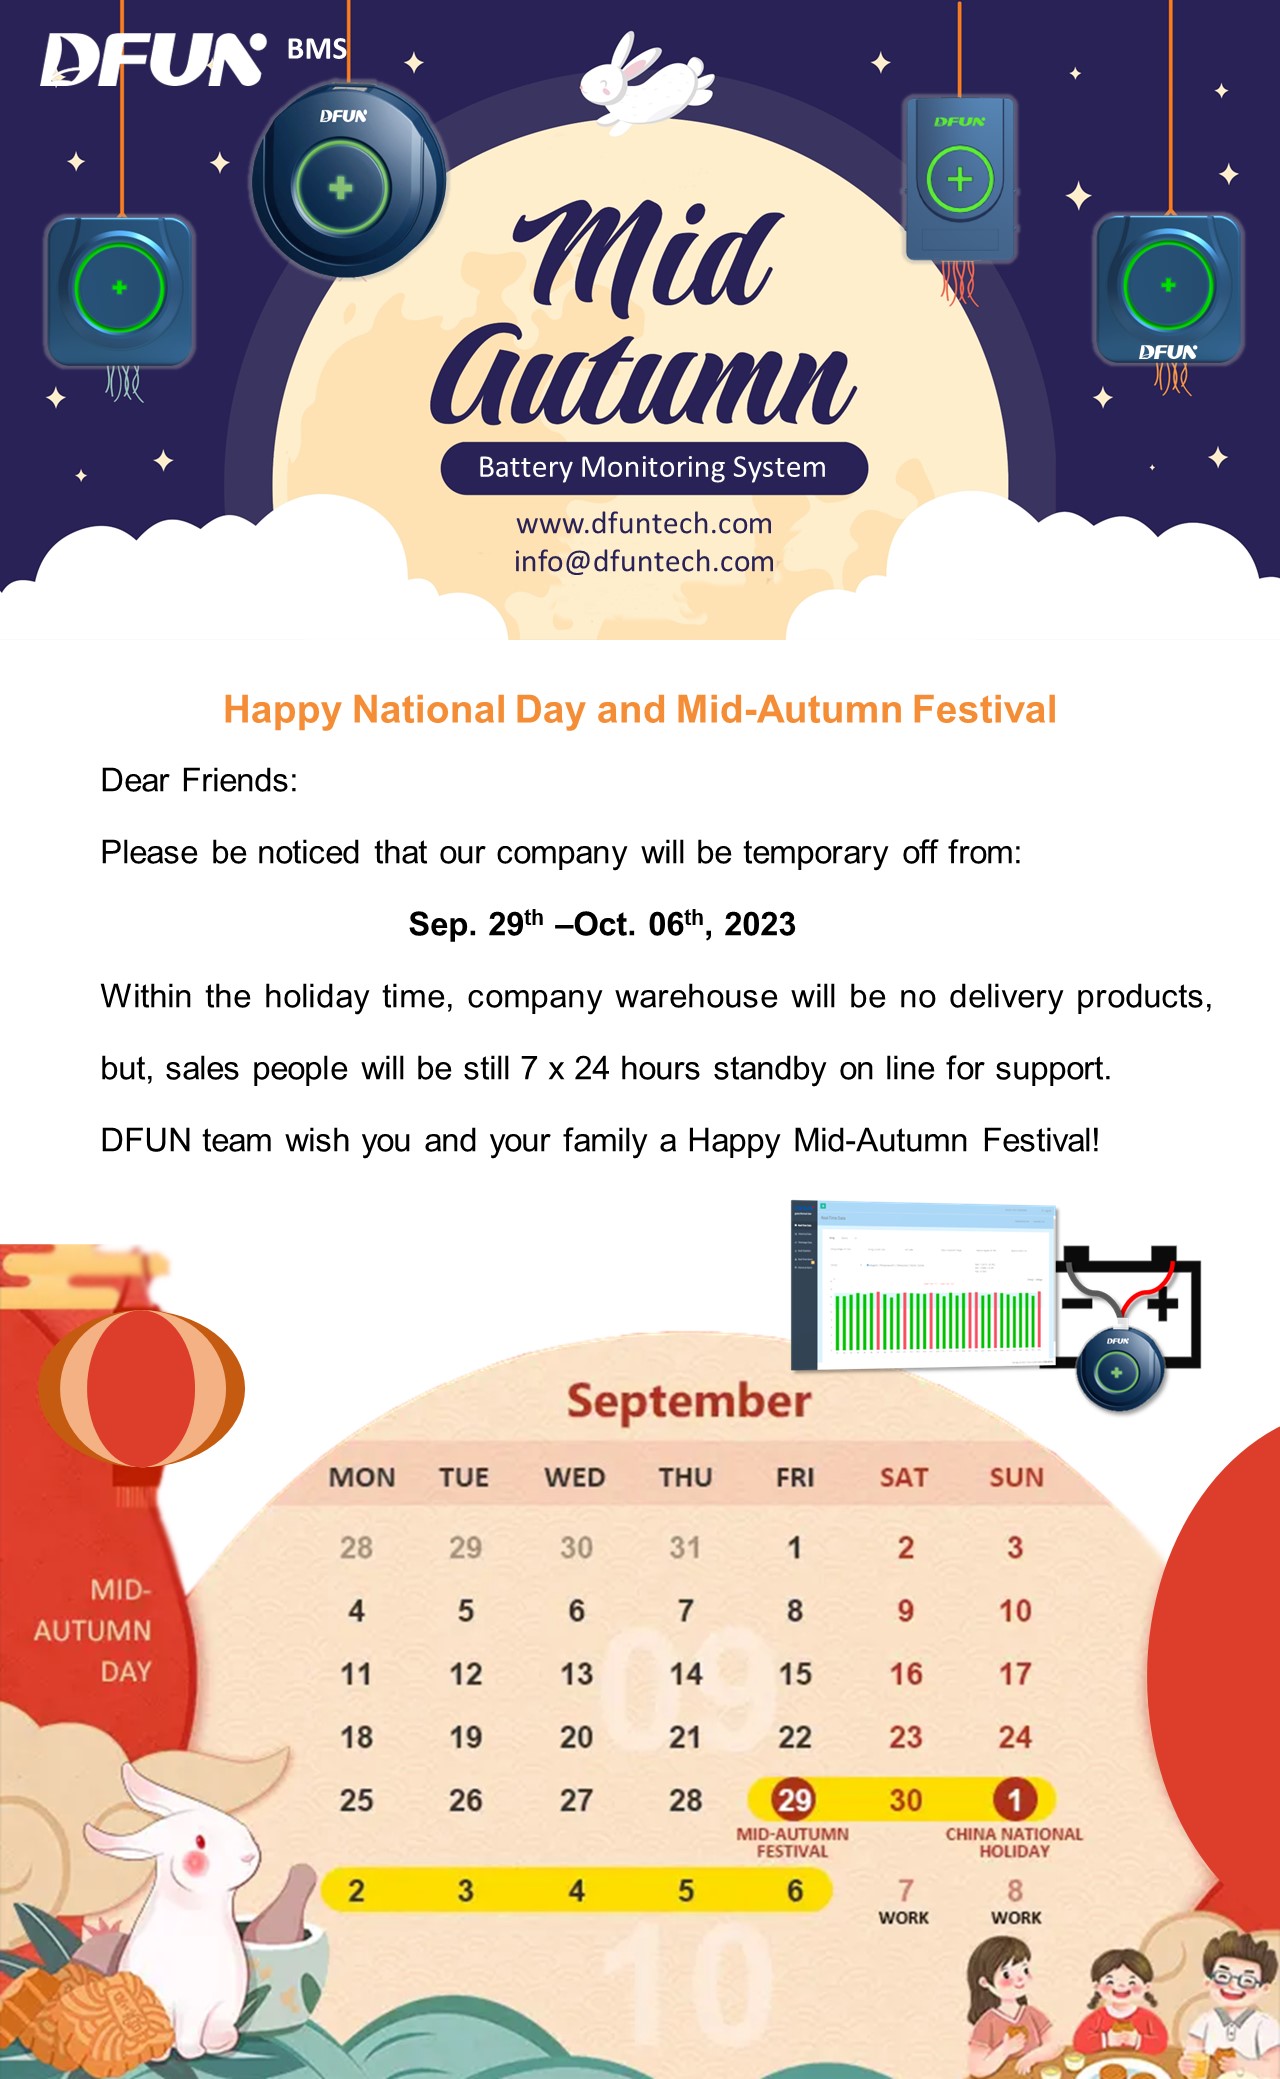 Happy Mid-Autumn Festival & National Day